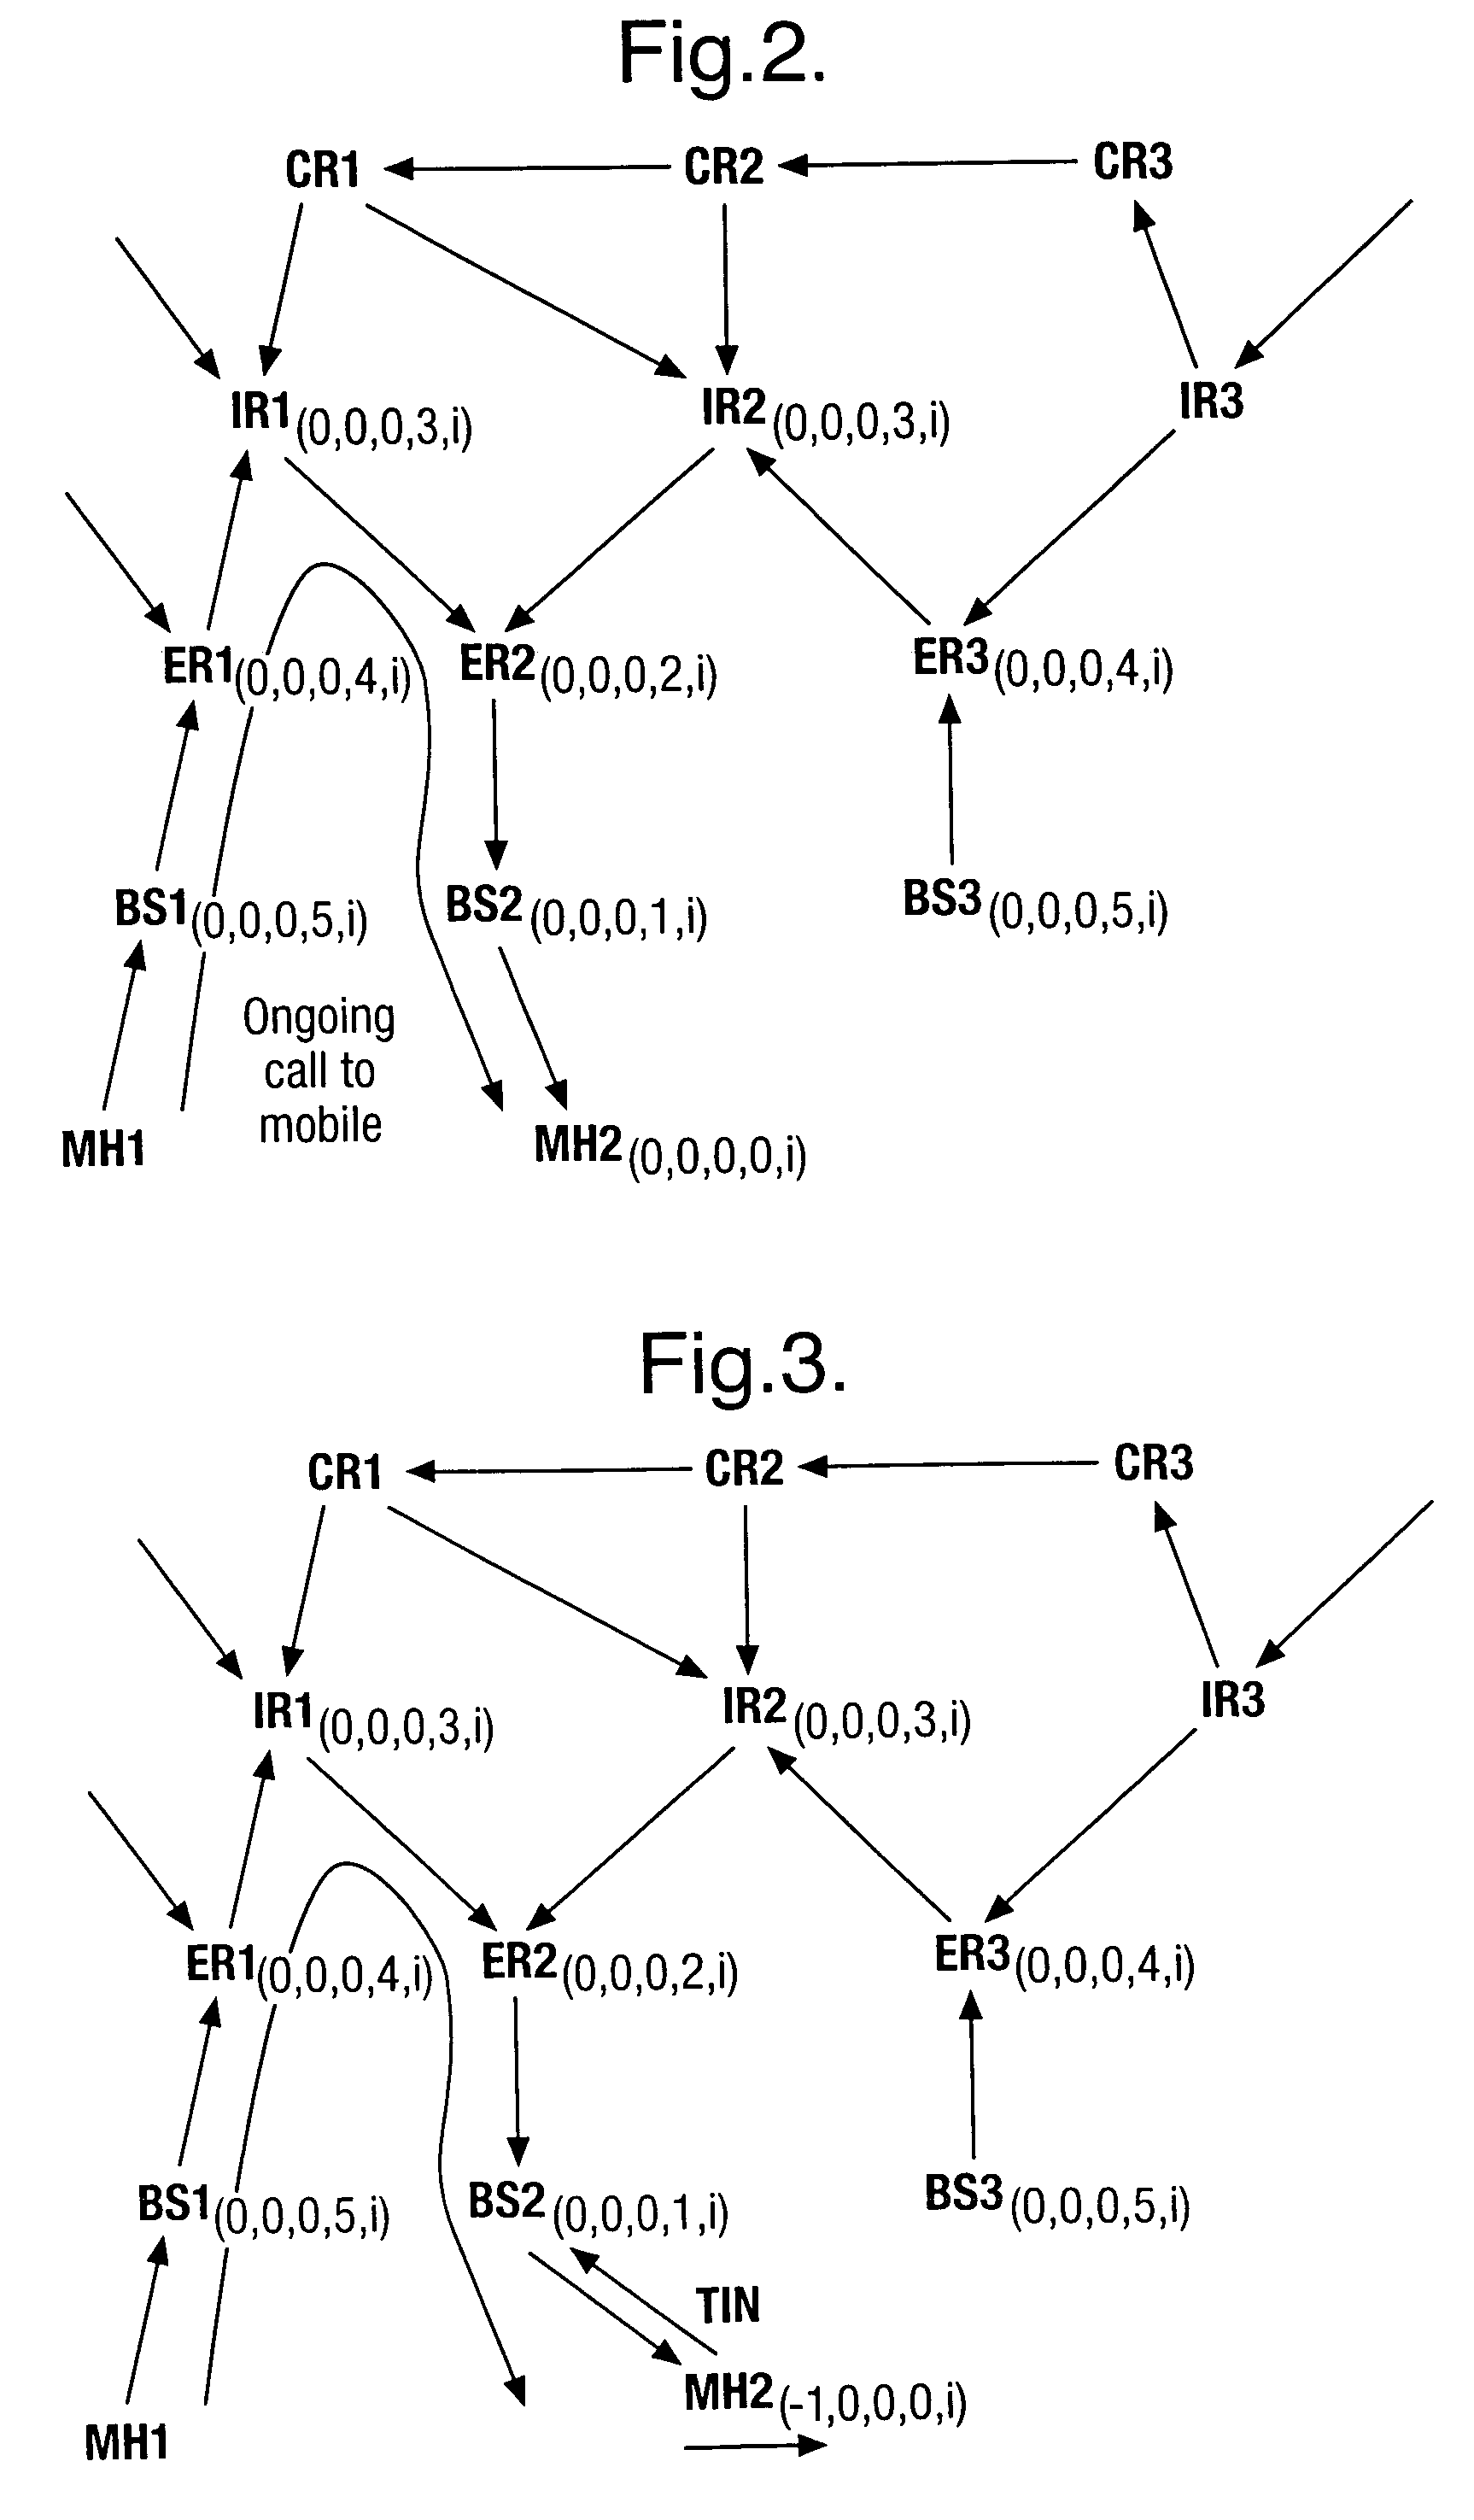 Telecommunication routing using multiple routing protocols in a single domain